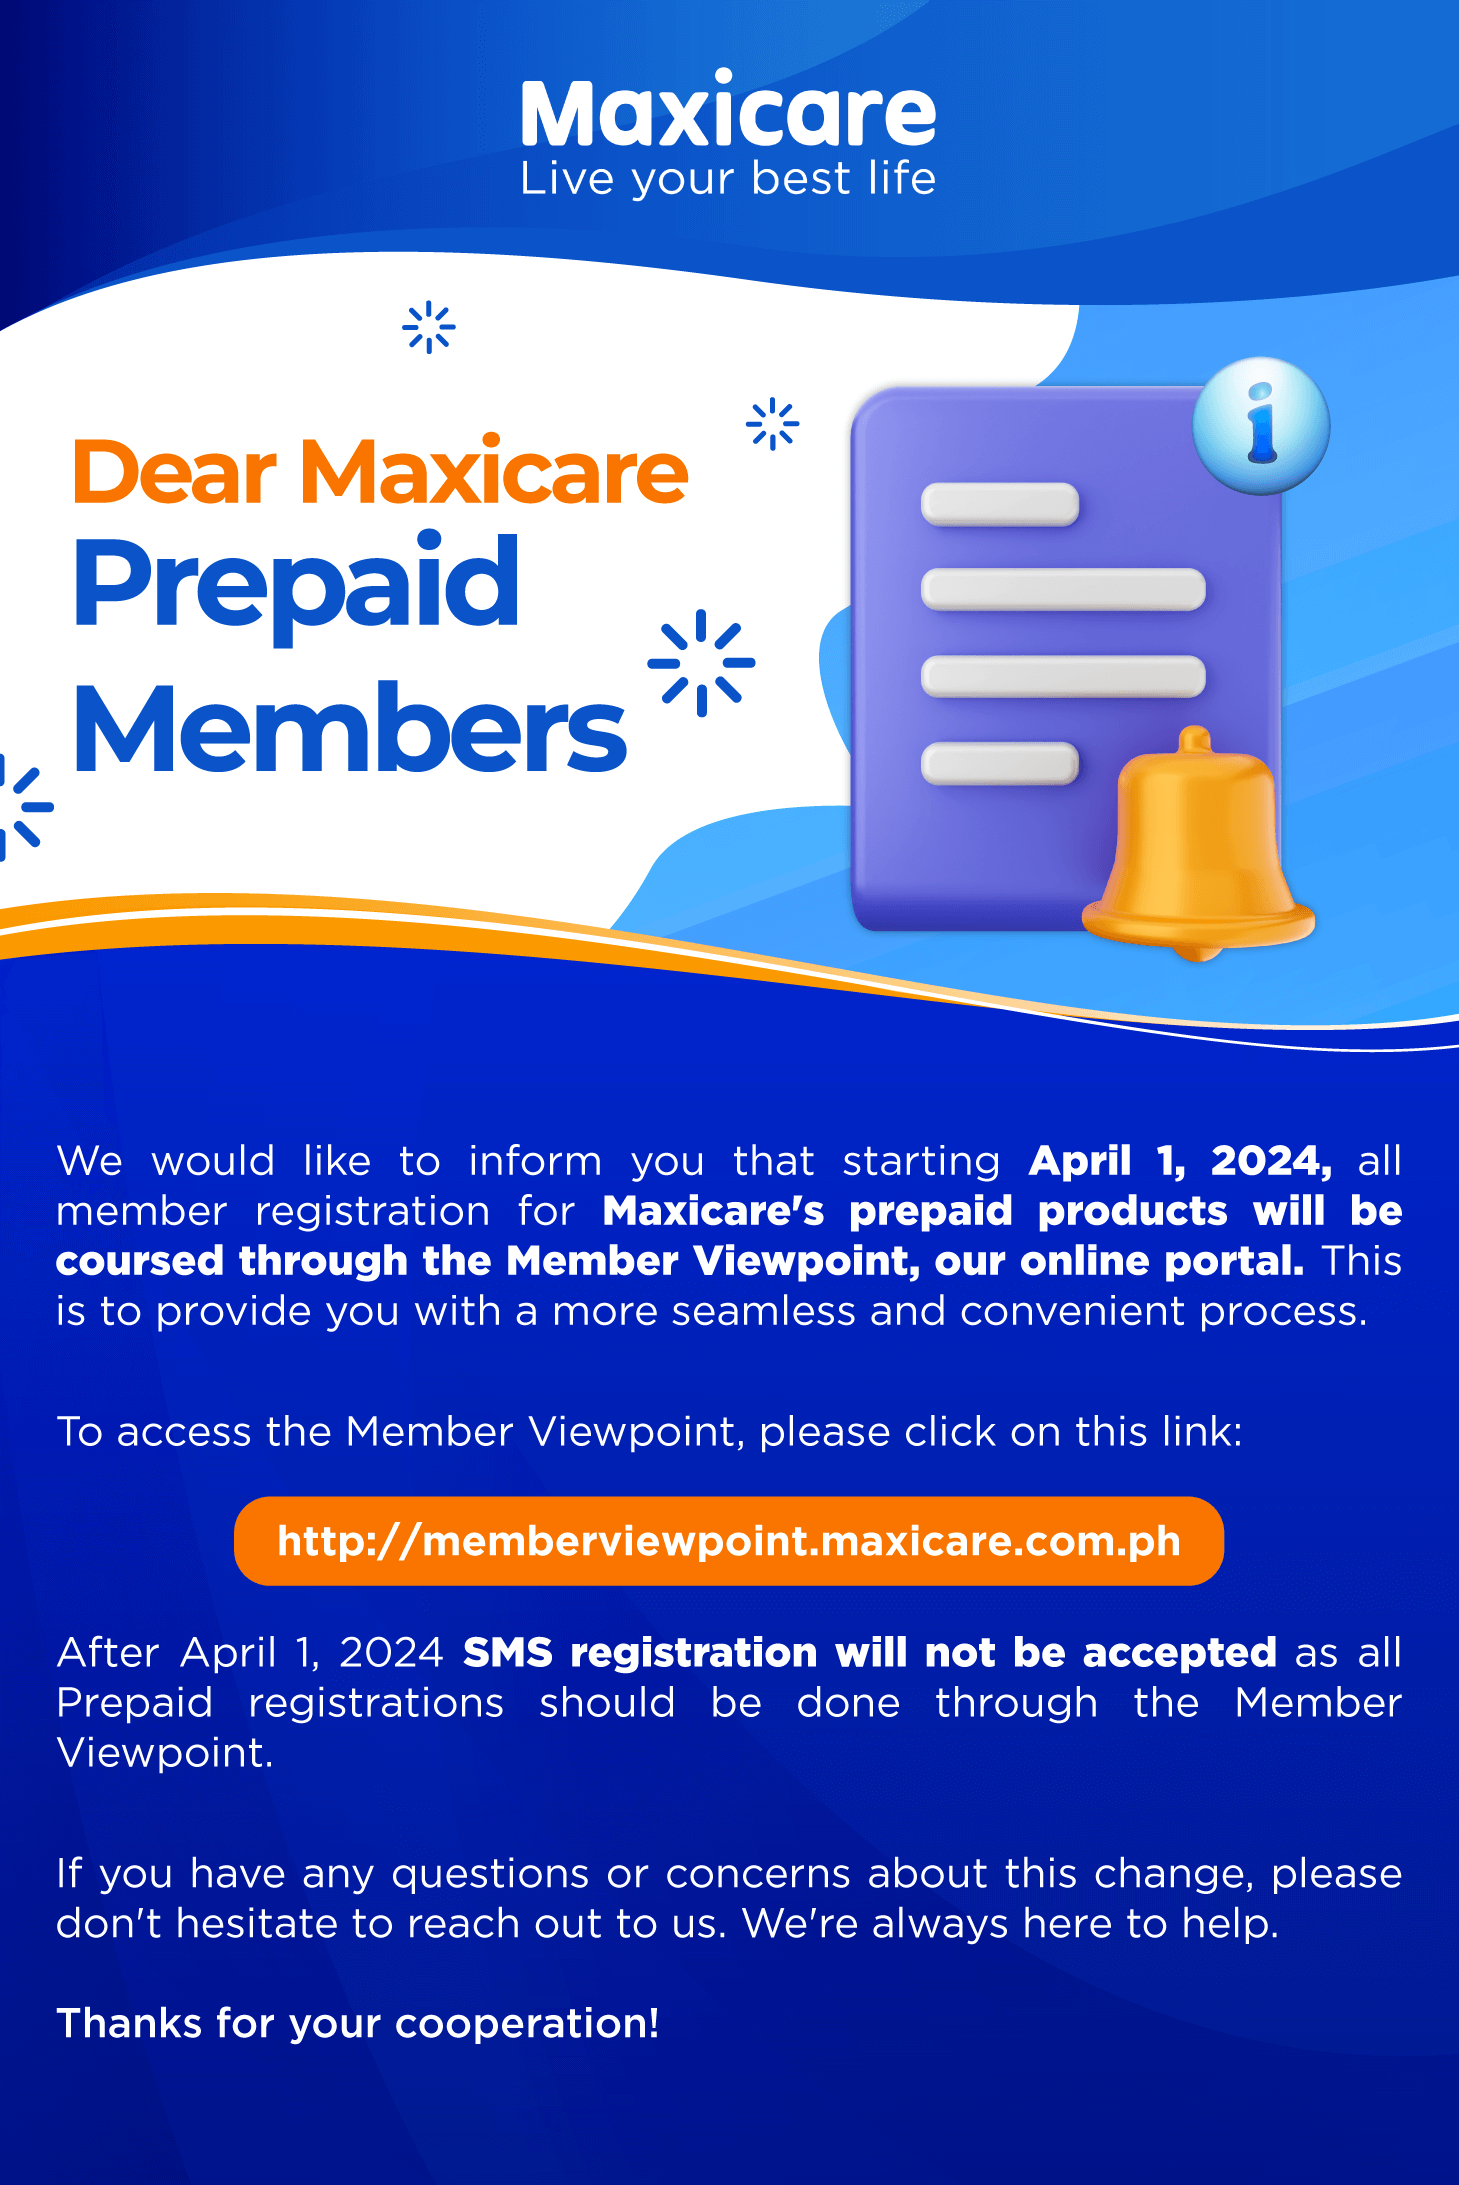 Maxicare Moves Prepaid Registrations Online for Enhanced Convenience